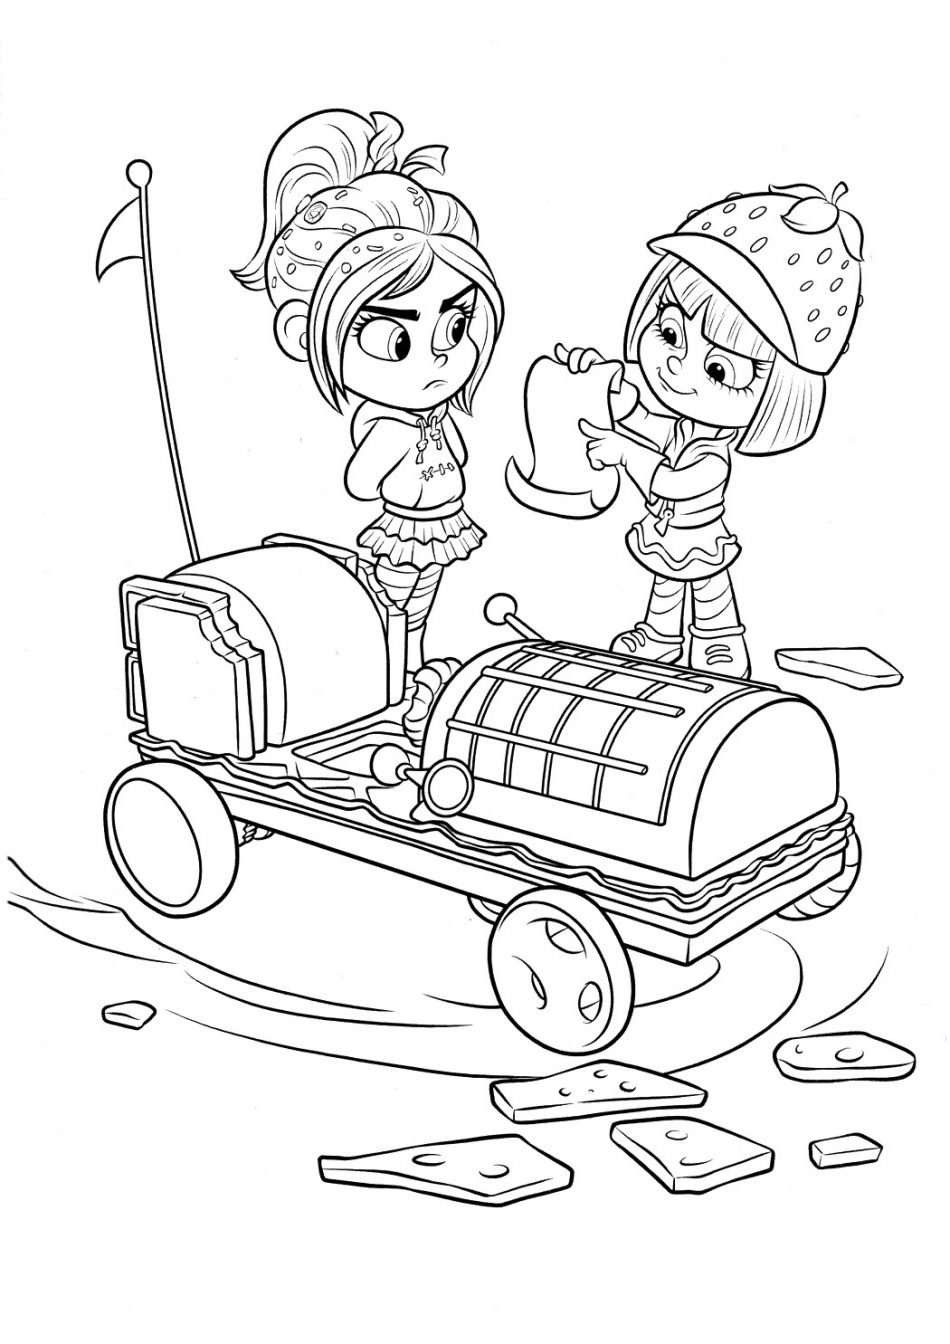 taffyta and vanellope coloring page e1580586966652